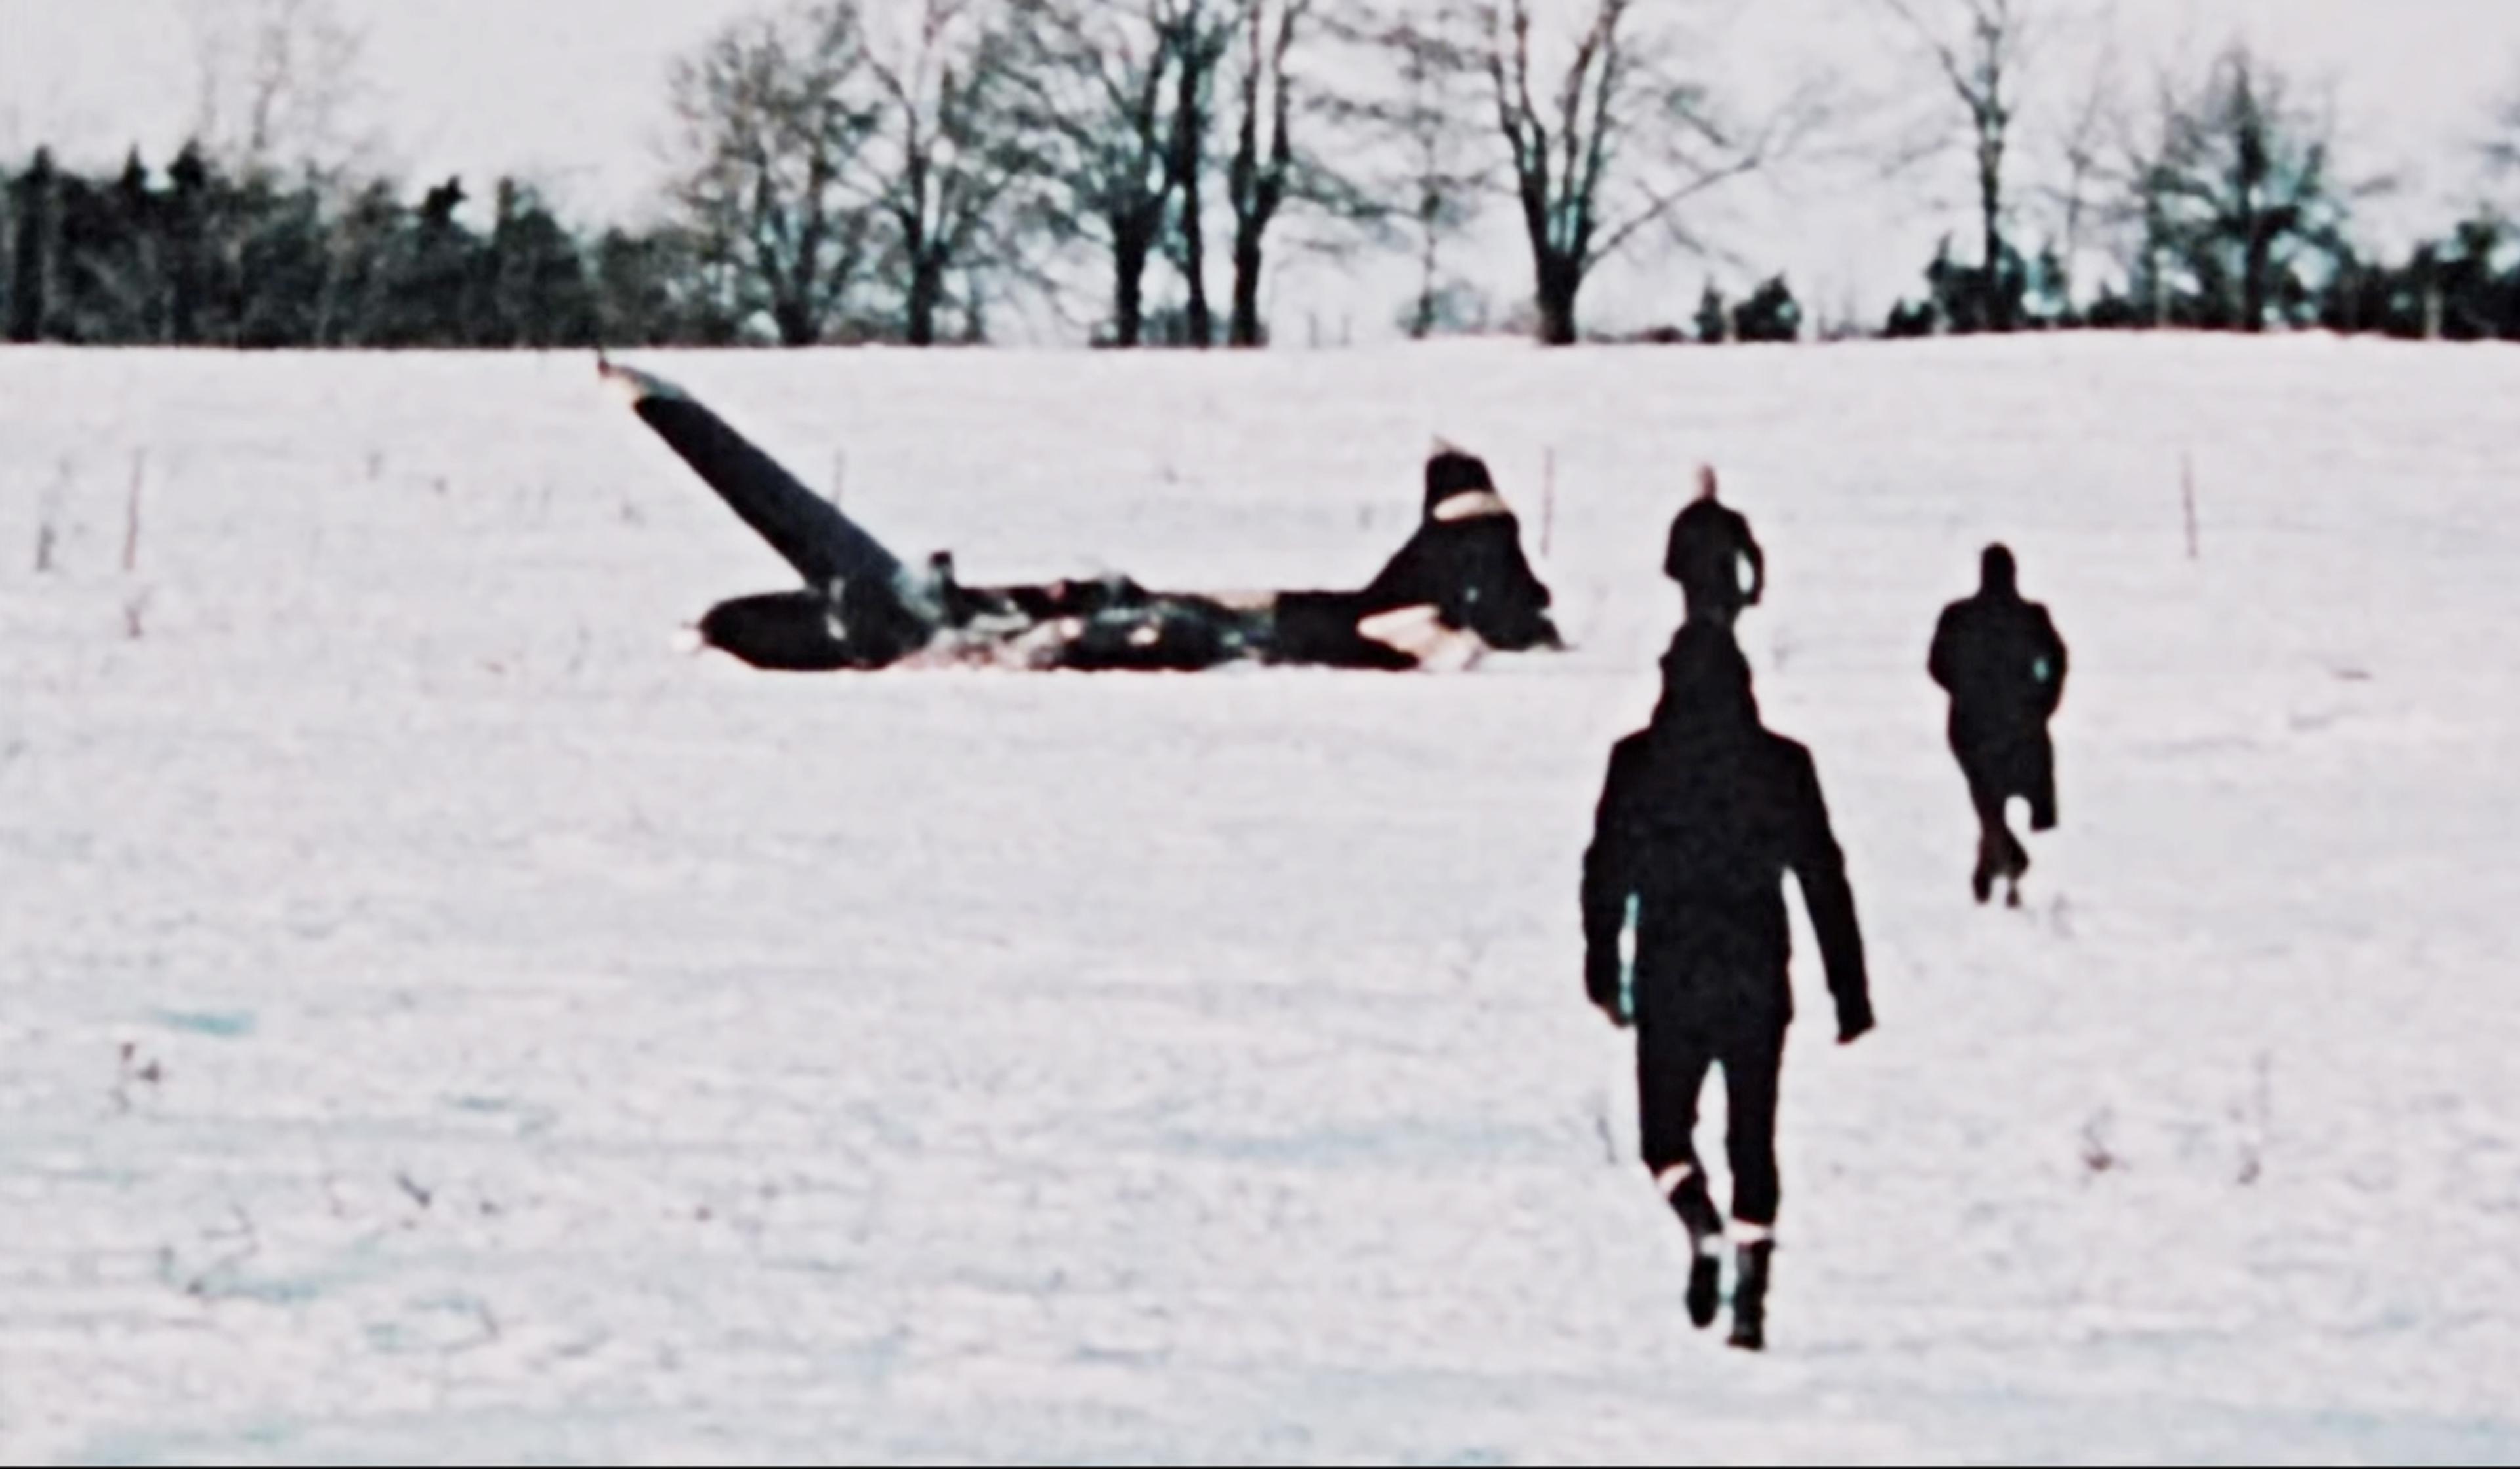 People walking towards a crashed aeroplane in a snowy field with trees in the background.